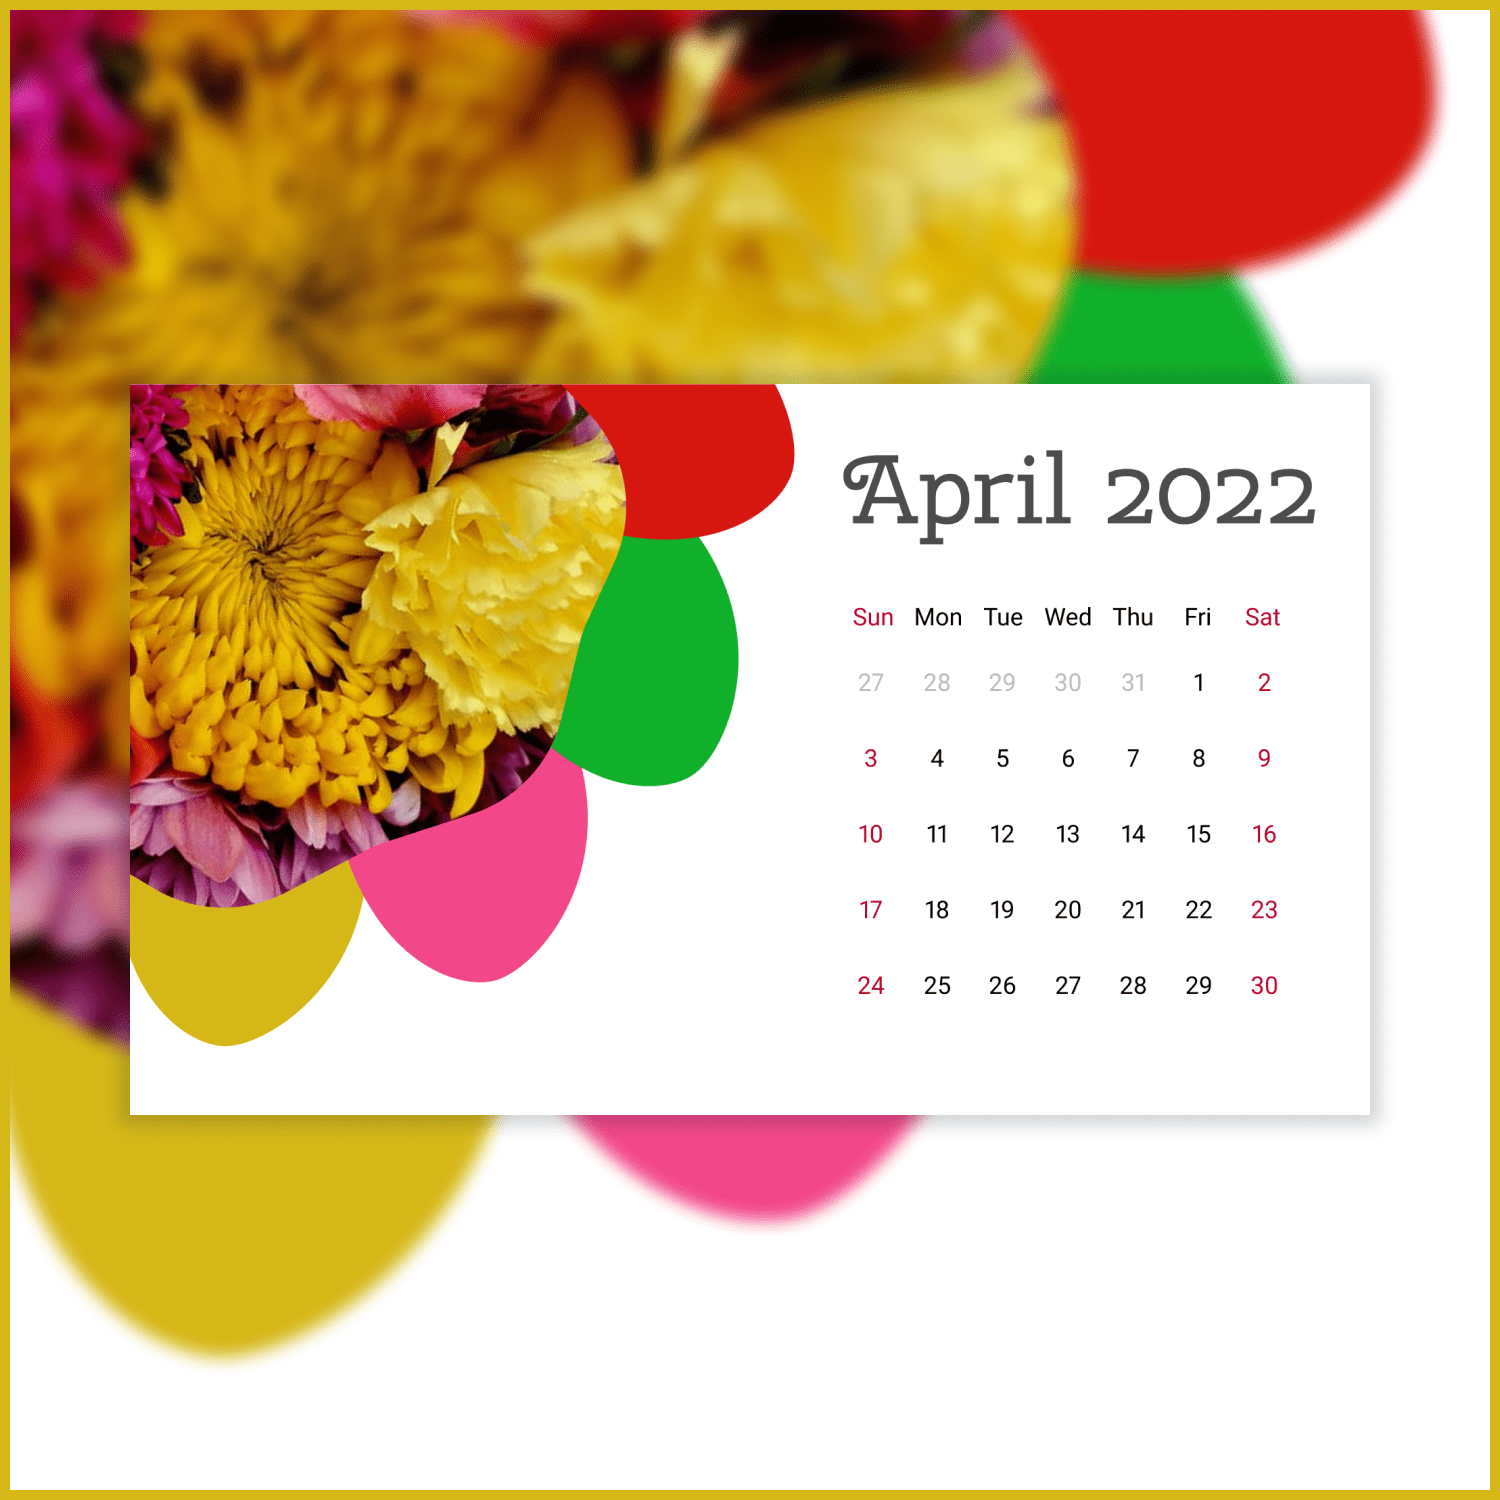 Super Bright April Calendar for 2022 with Yellow Flowers cover.